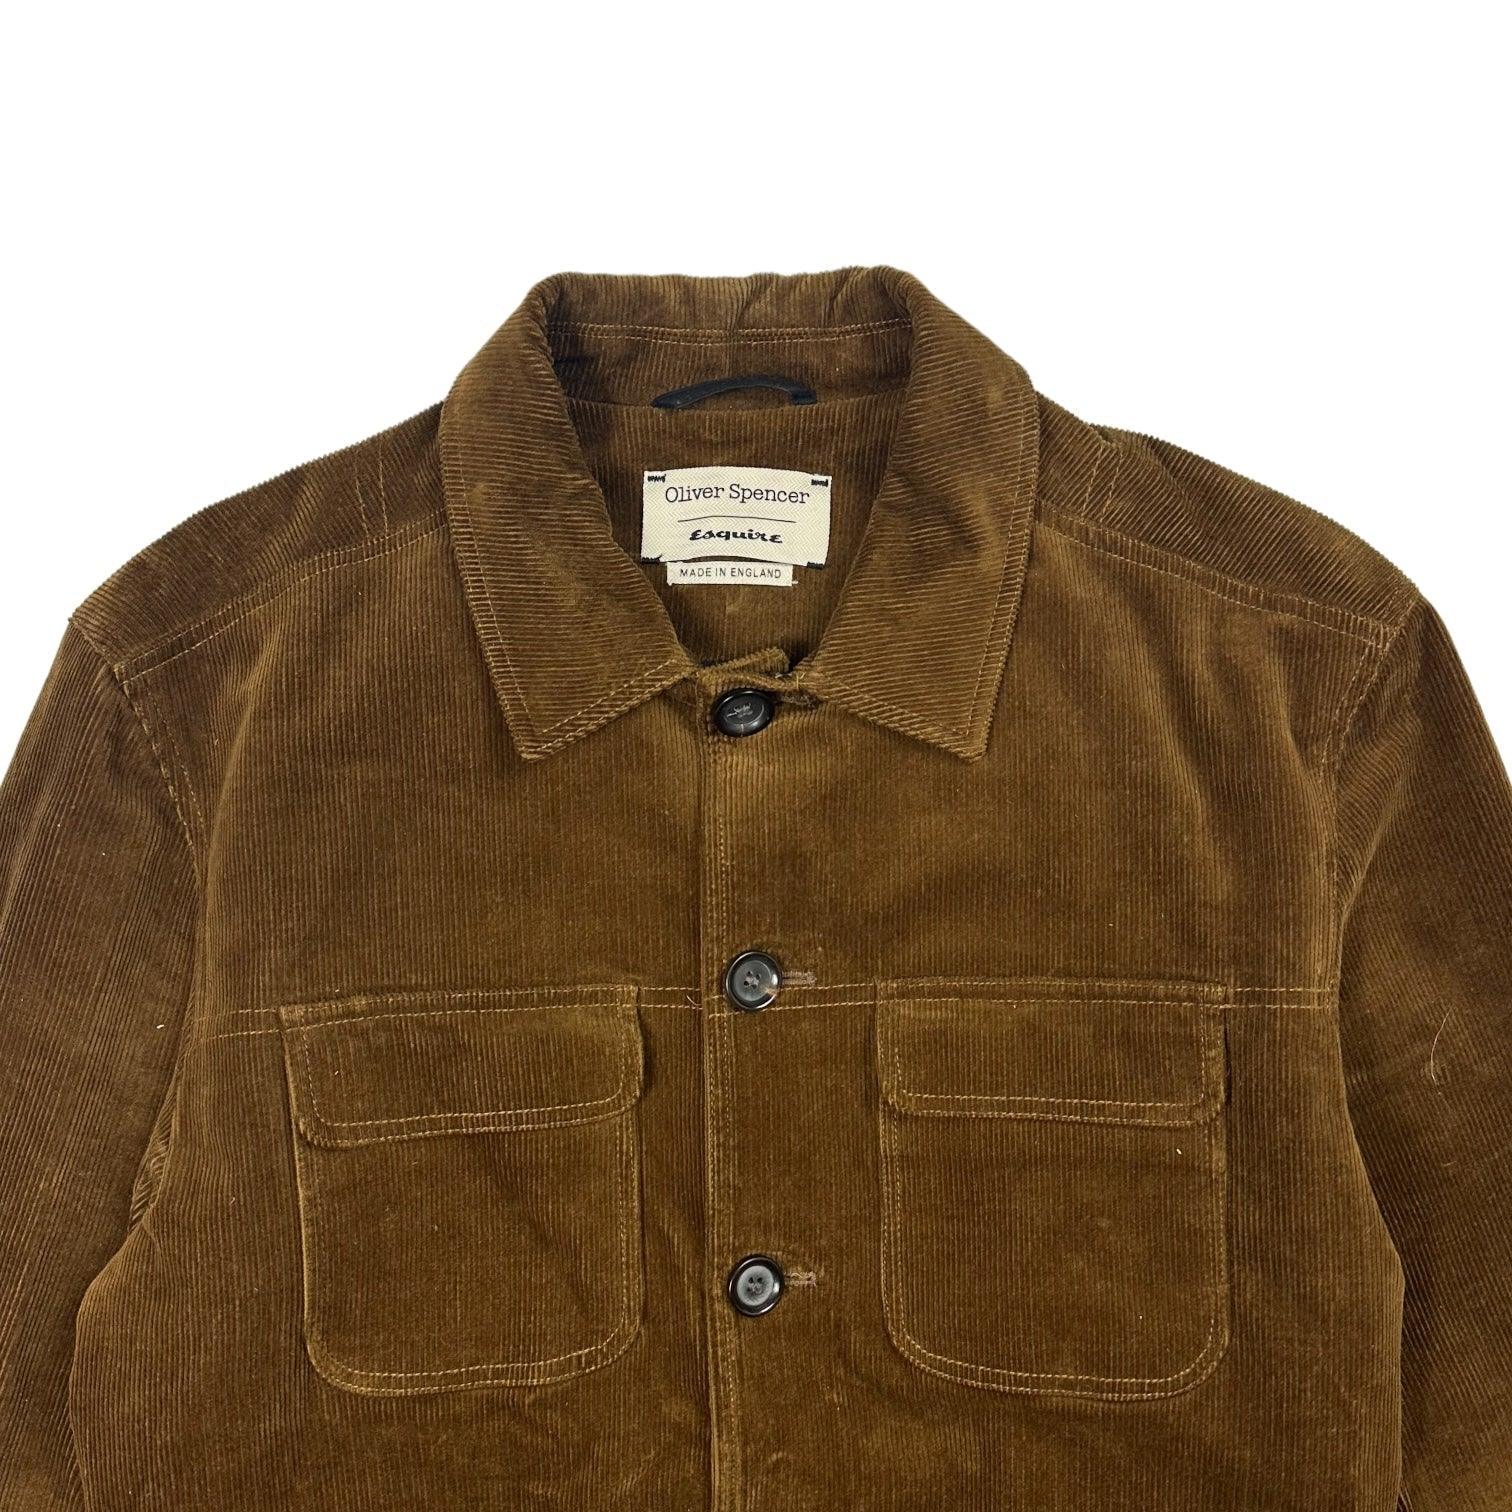 Oliver Spencer x Esquire Cowboy Jacket - Known Source